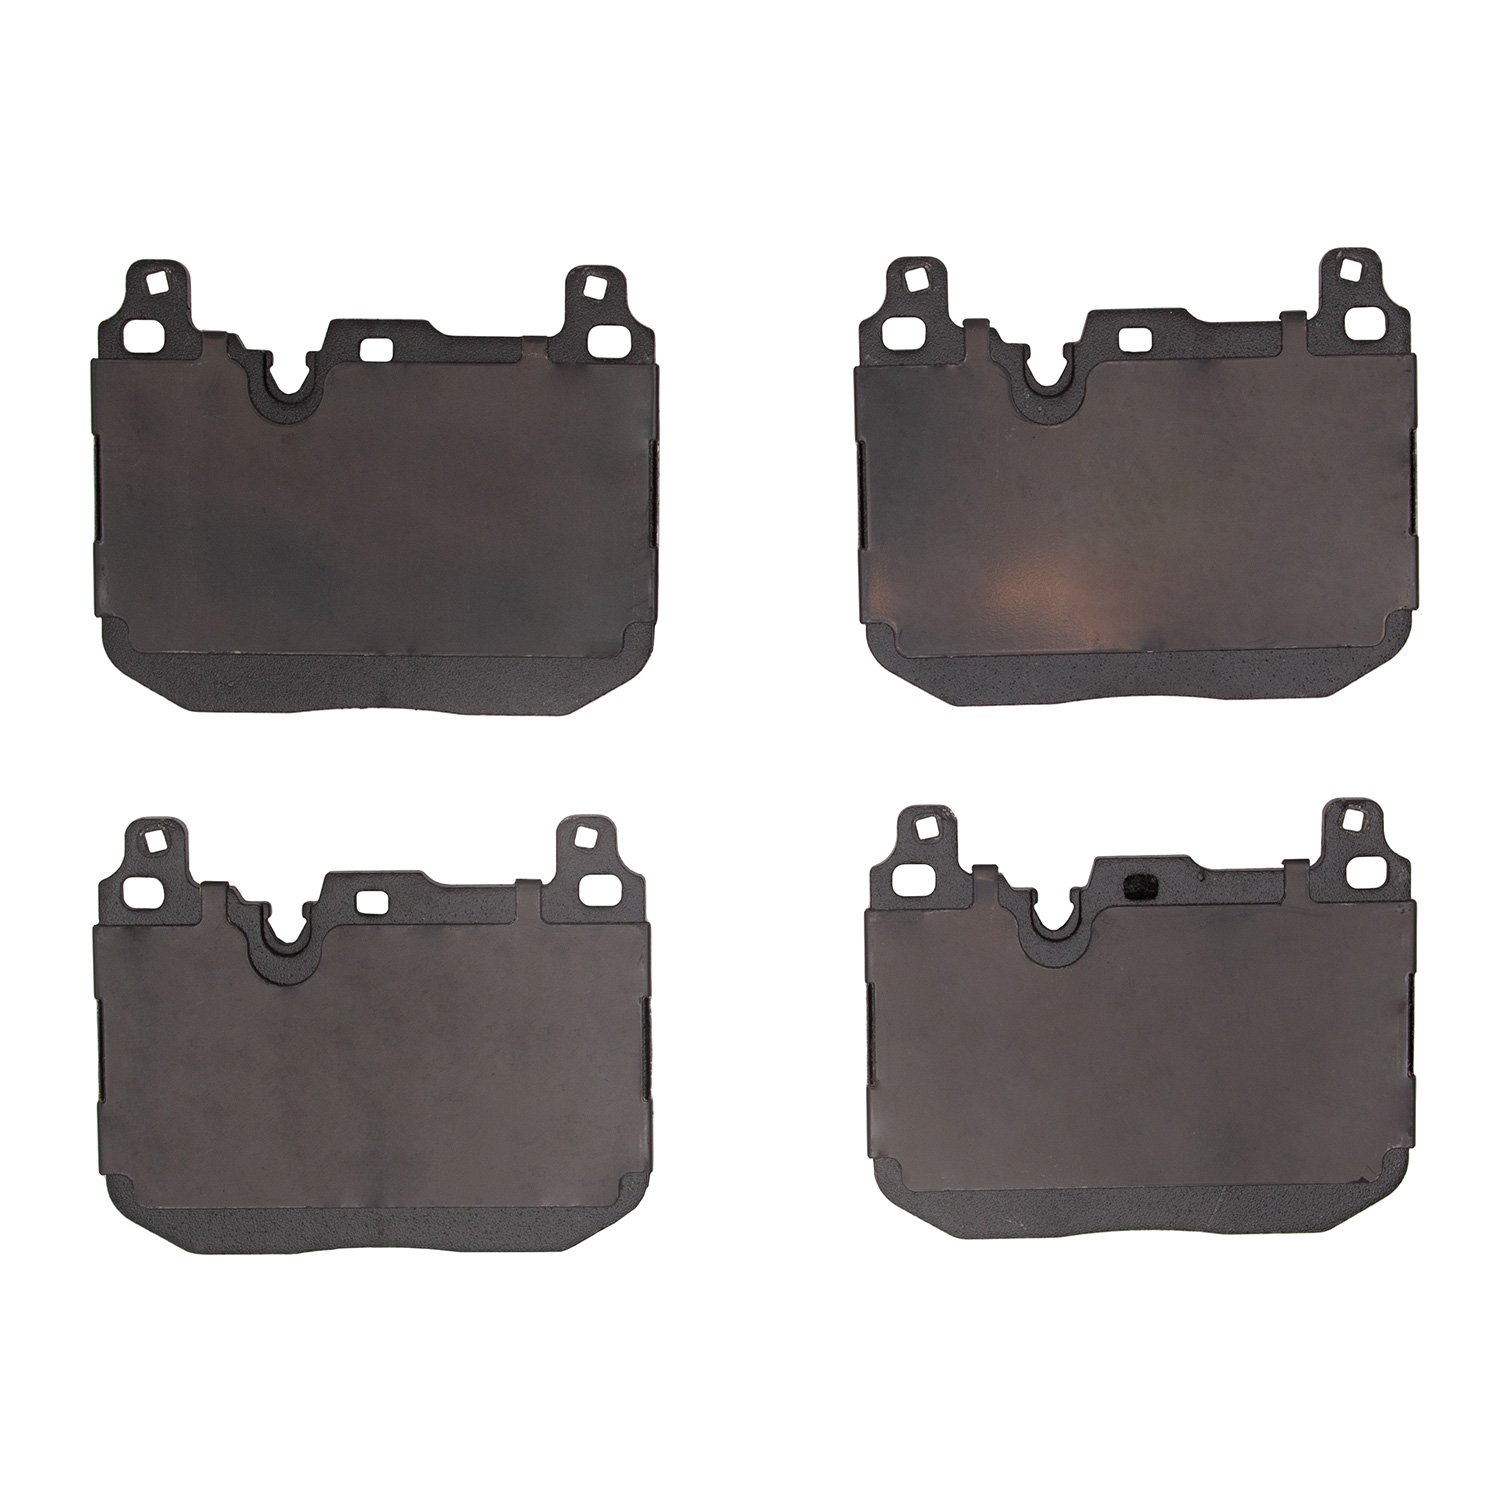 1551-1609-20 5000 Advanced Low-Metallic Brake Pads, Fits Select Multiple Makes/Models, Position: Front